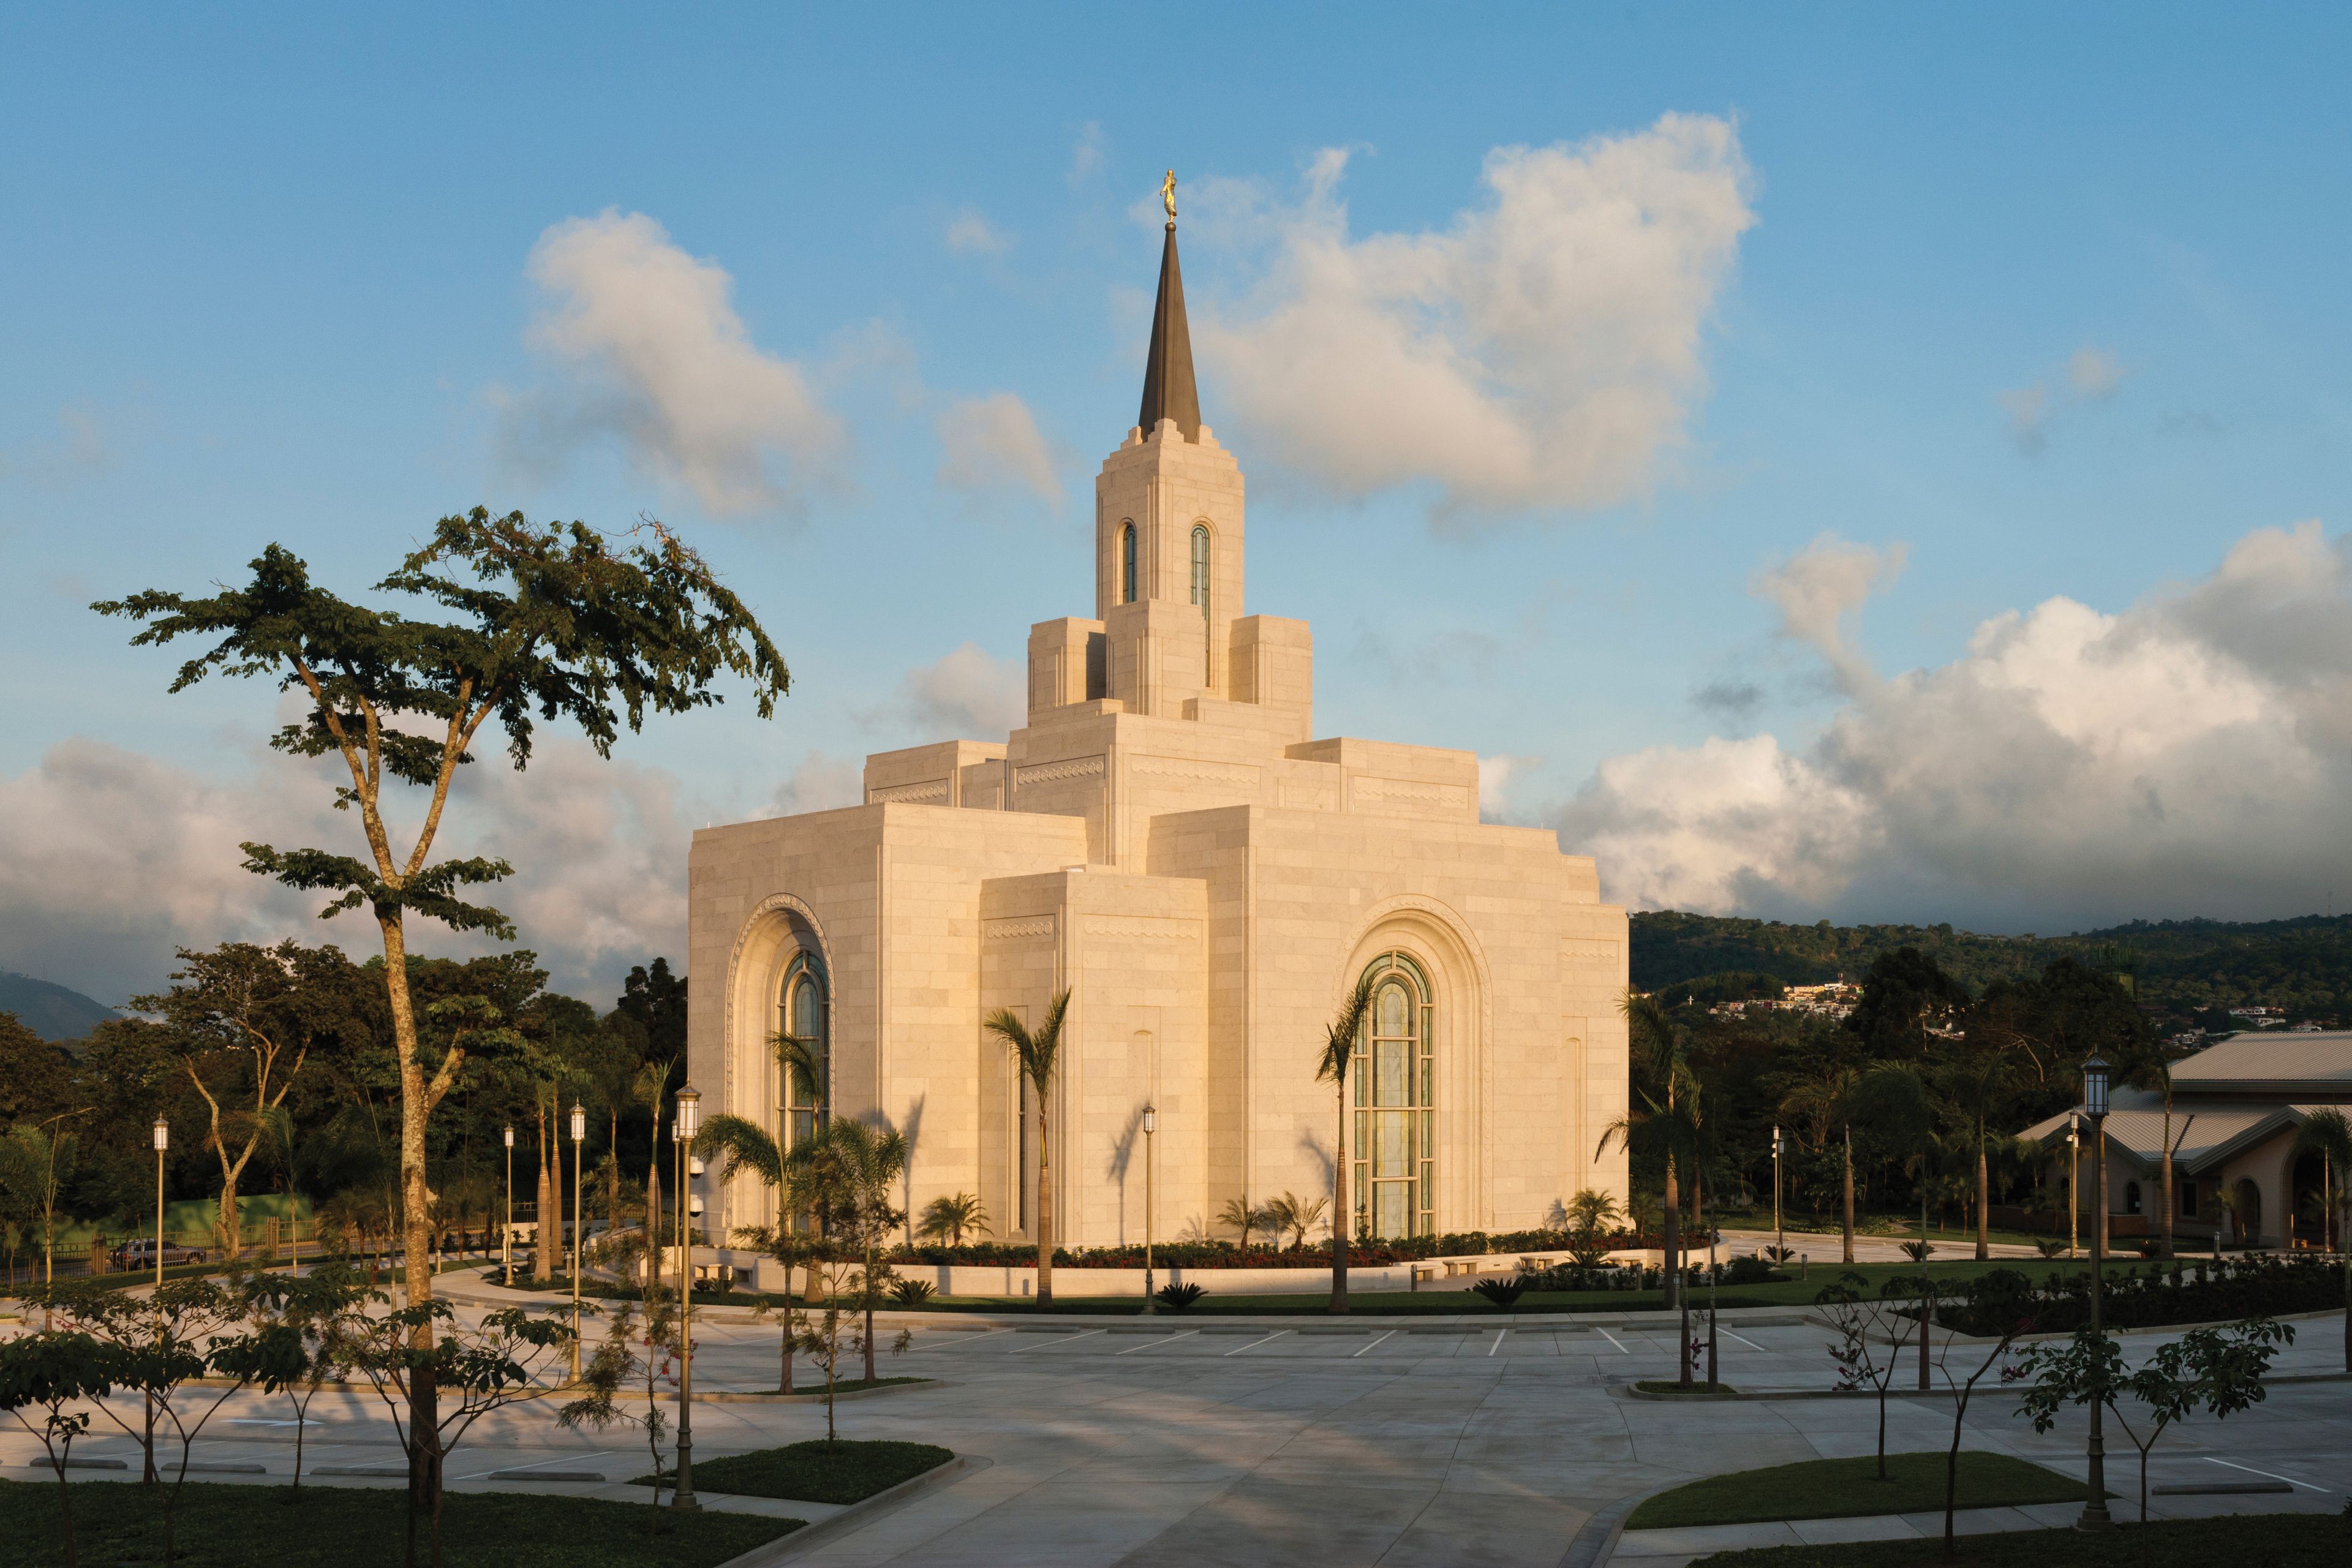 The entire San Salvador El Salvador Temple, including the parking lot and scenery.